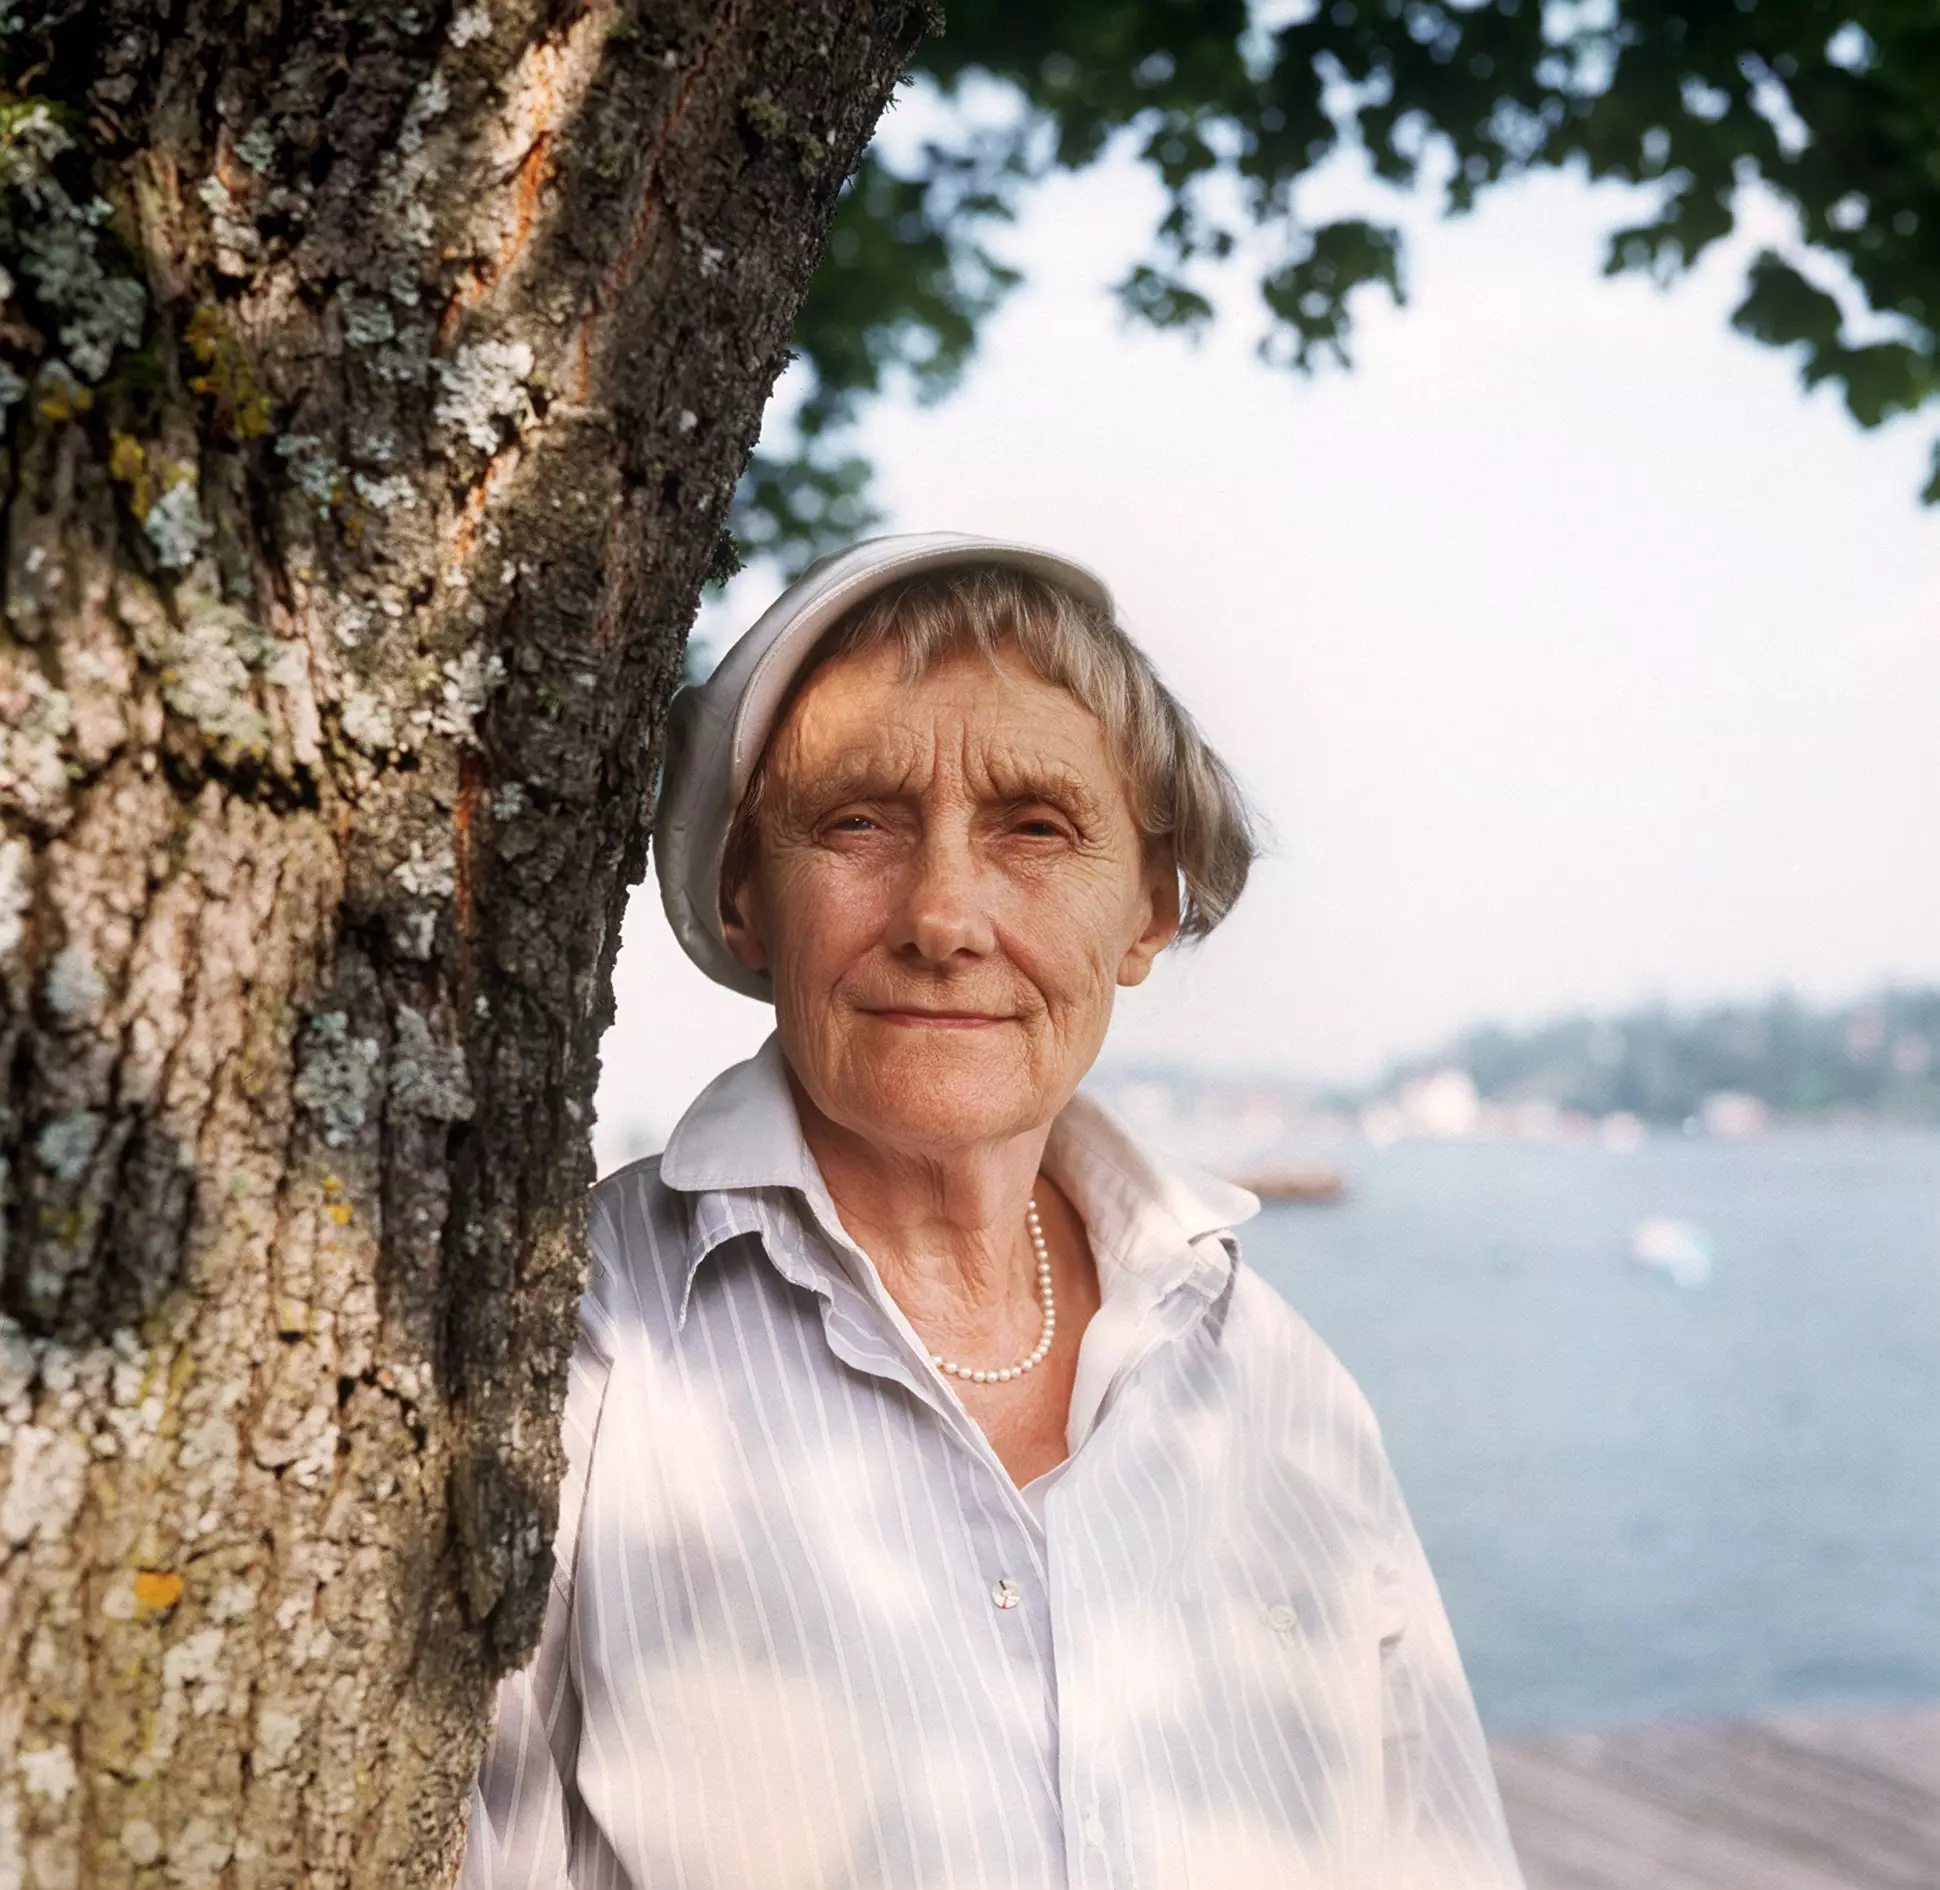 The beloved character was created by Swedish writer Astrid Lindgren. (